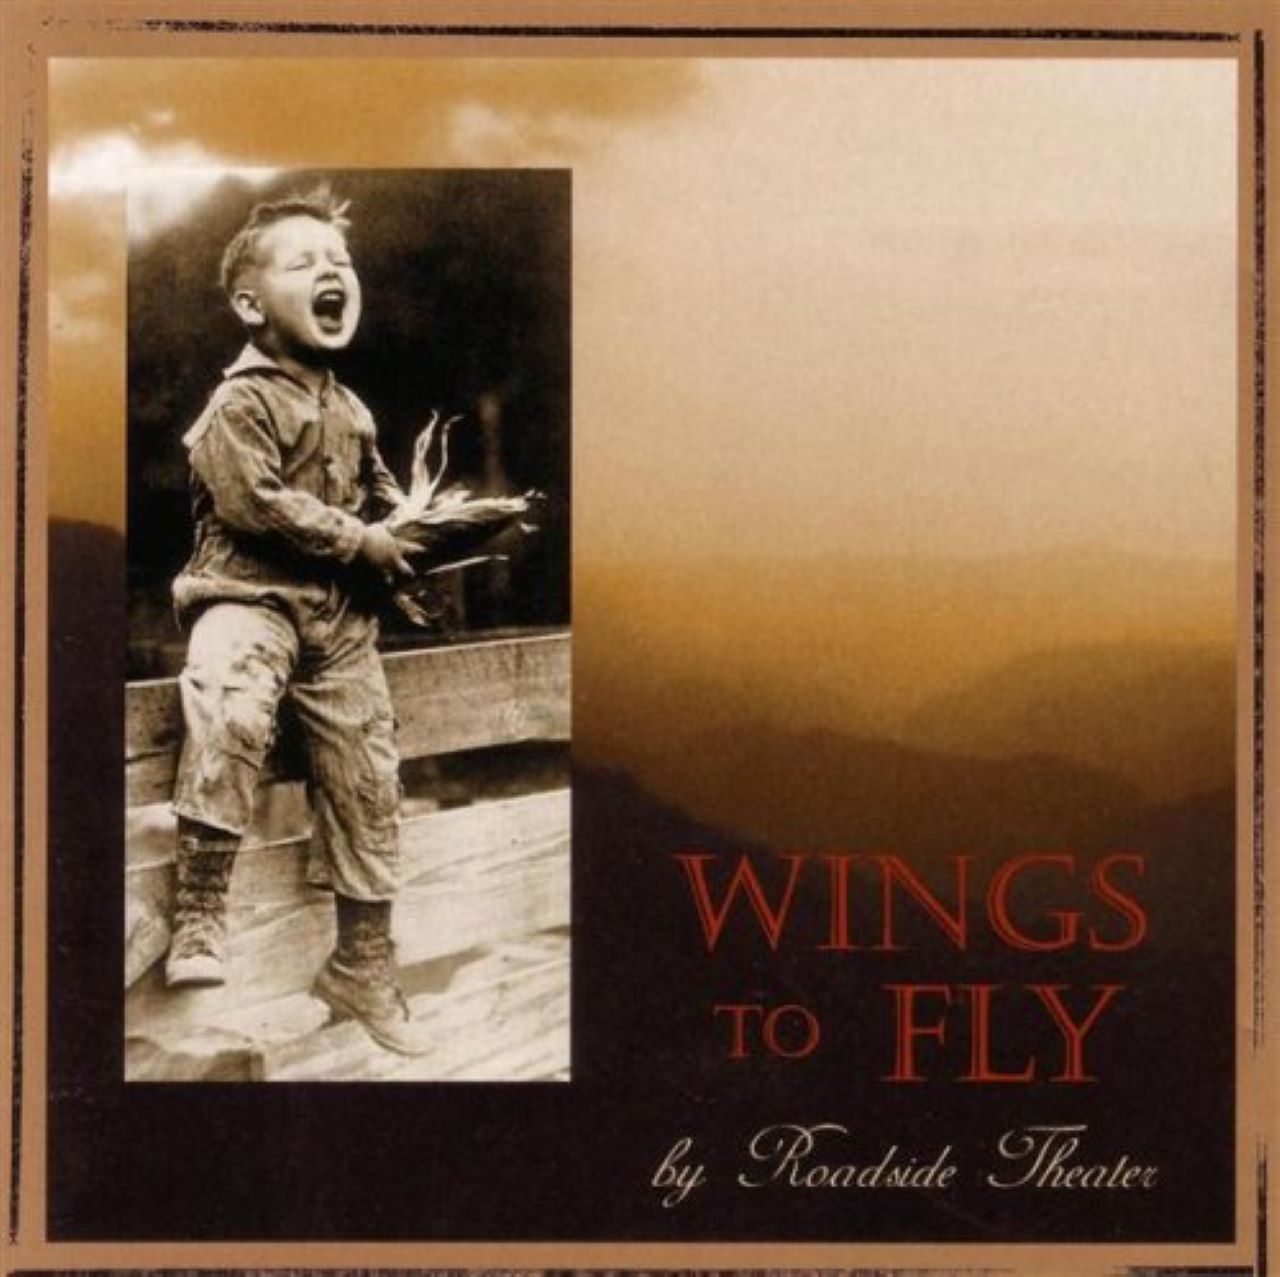 Roadside Theatre - Wings To Fly cover album